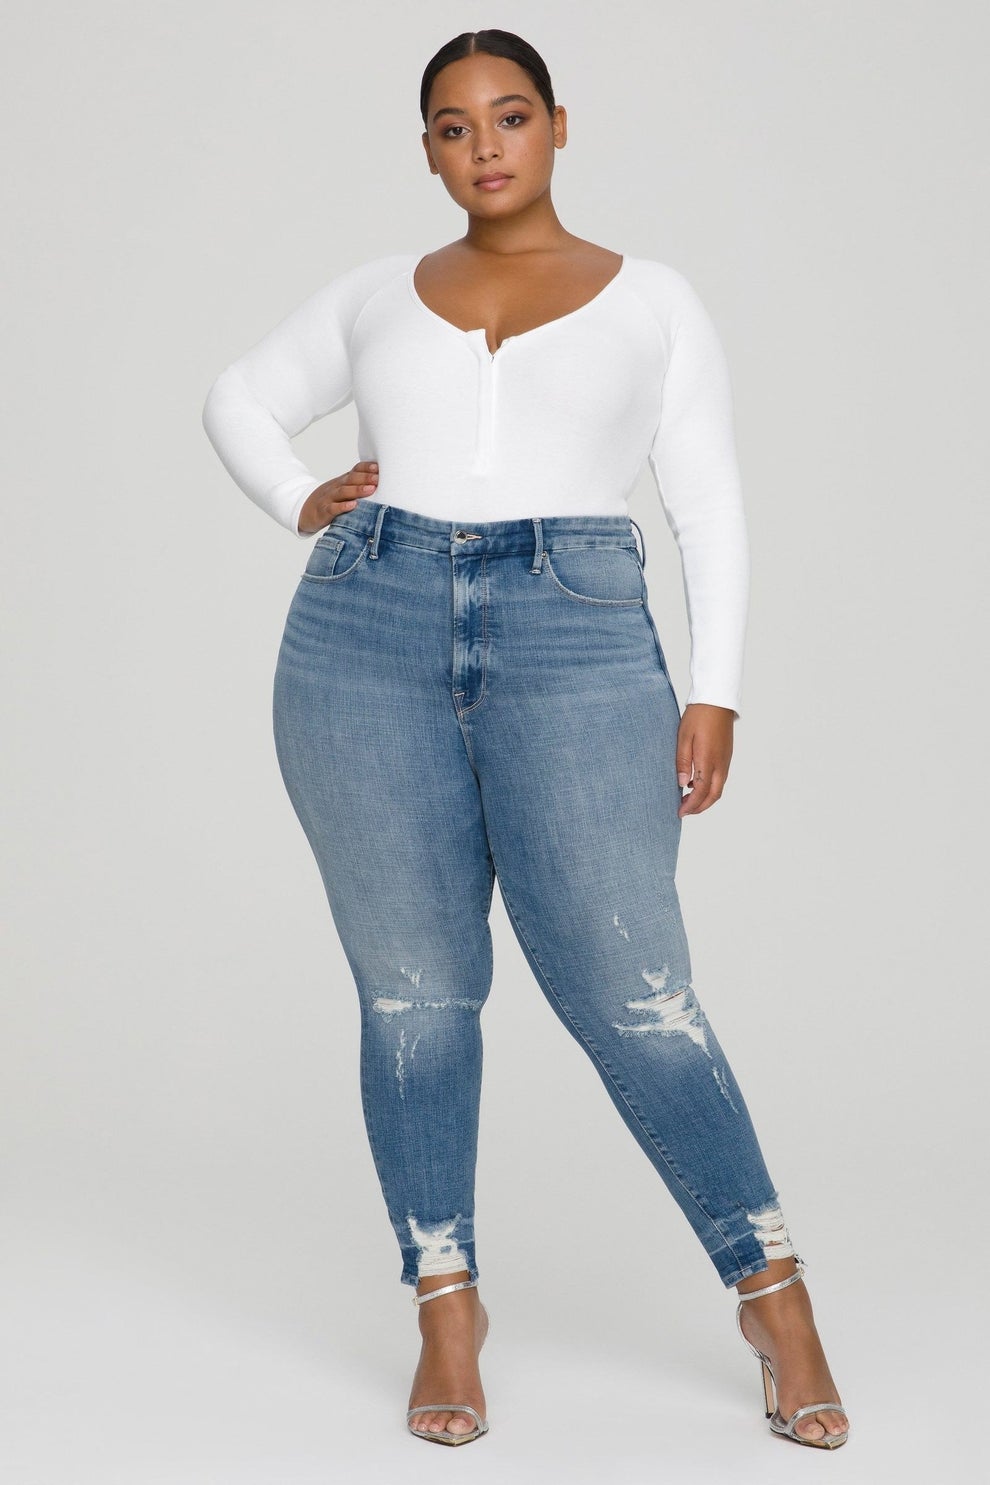 17 Plus Size Jeans That *Actually* Comfortable